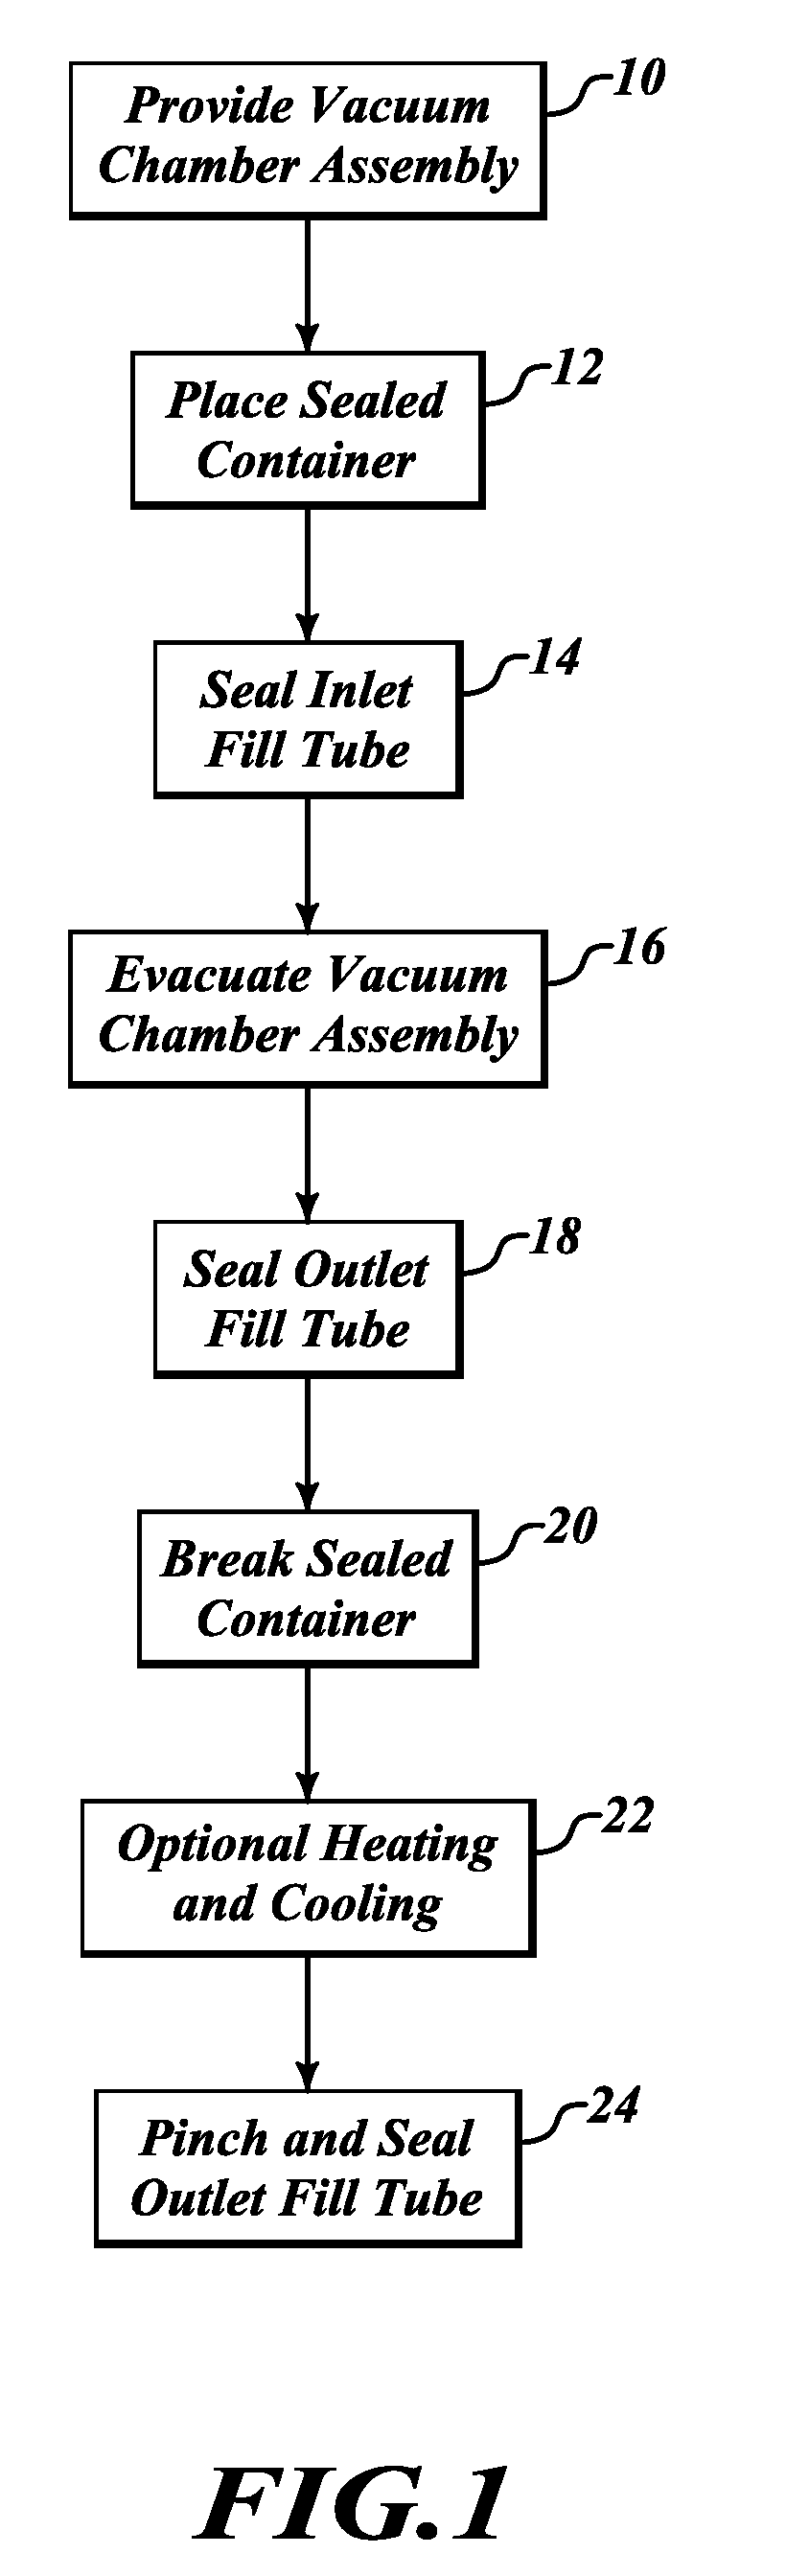 Methods for introduction of a reactive material into a vacuum chamber